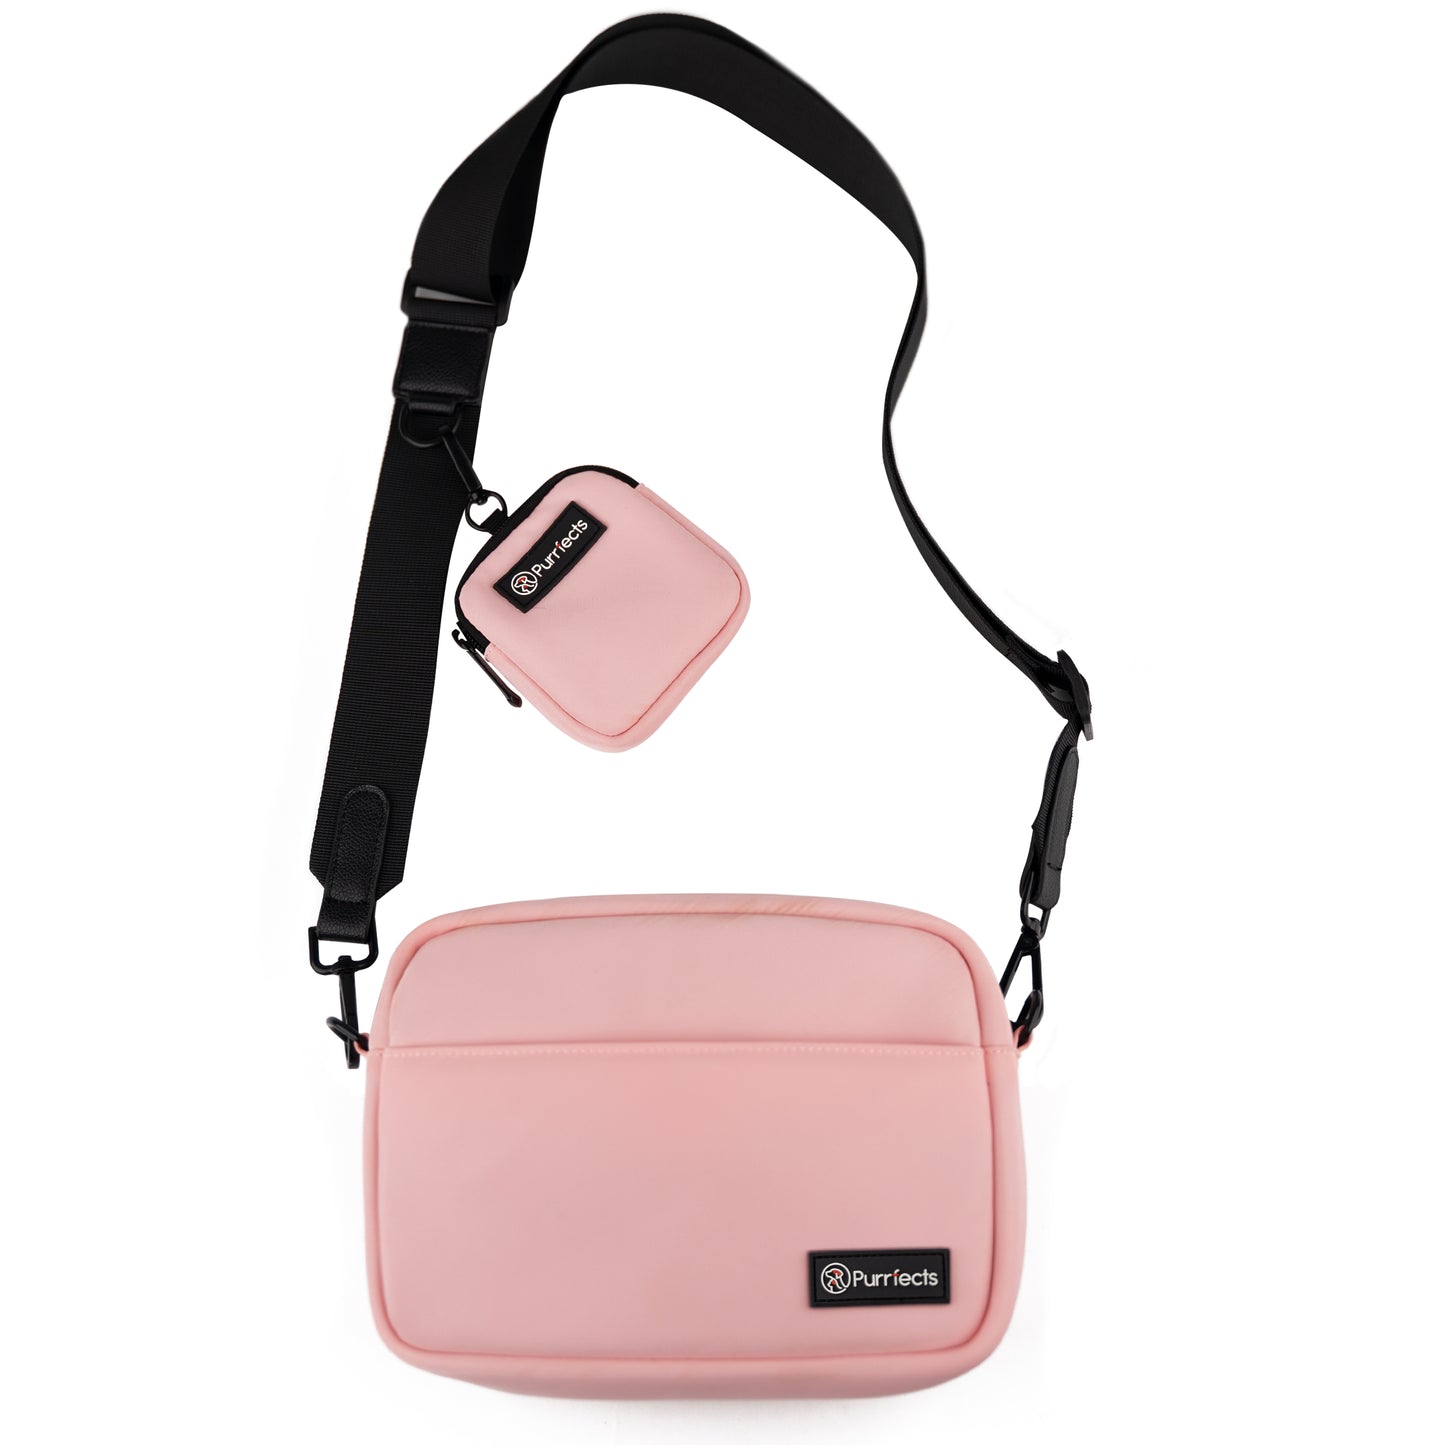 Dog Walking Bag Crossbody with Dog Treat Pouch and Poop Bag Dispenser (Candyfloss Pink)